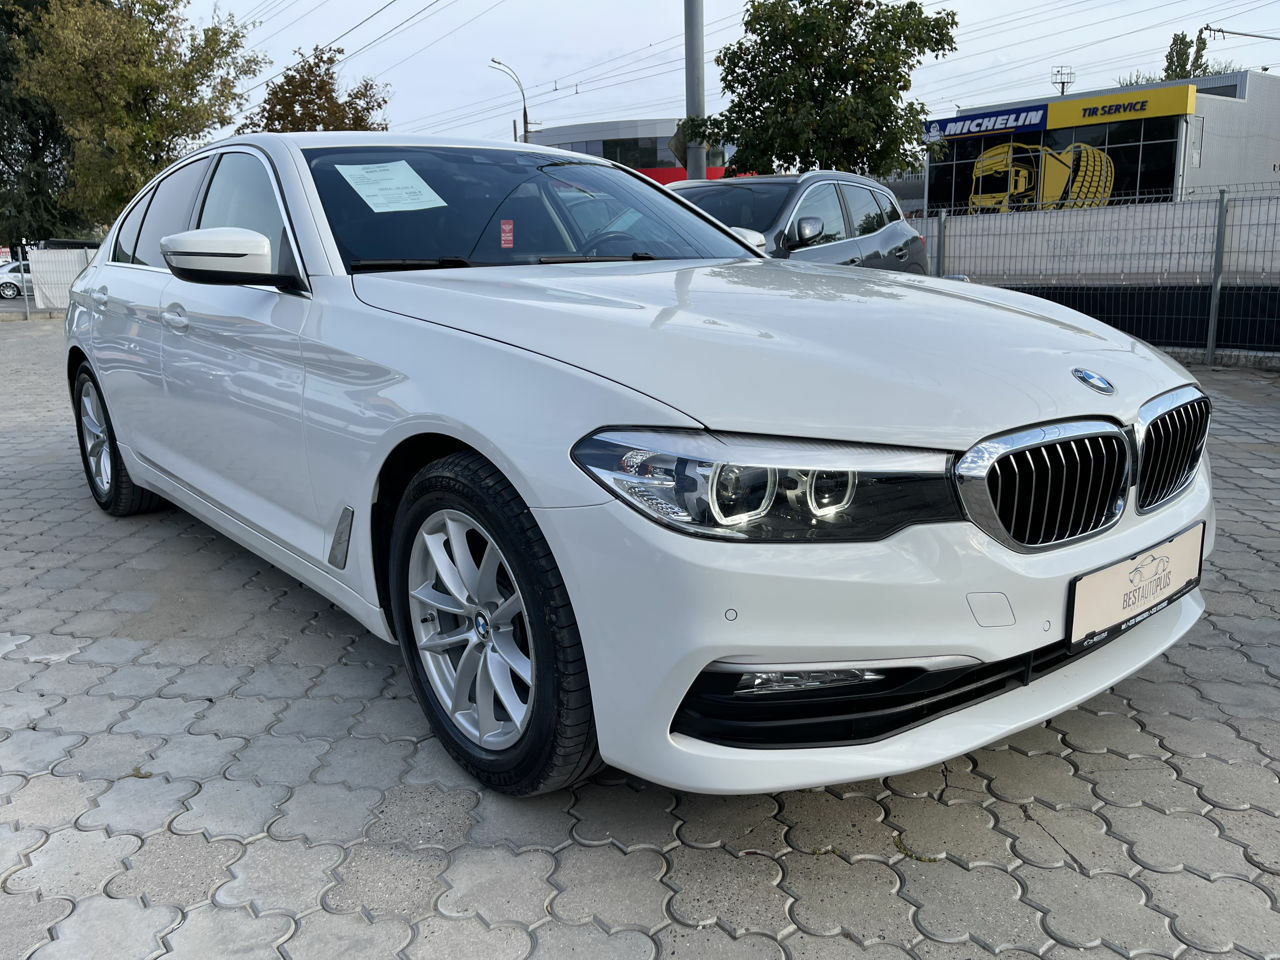 <span style="font-weight: bold;">bmw 520d&nbsp;</span>